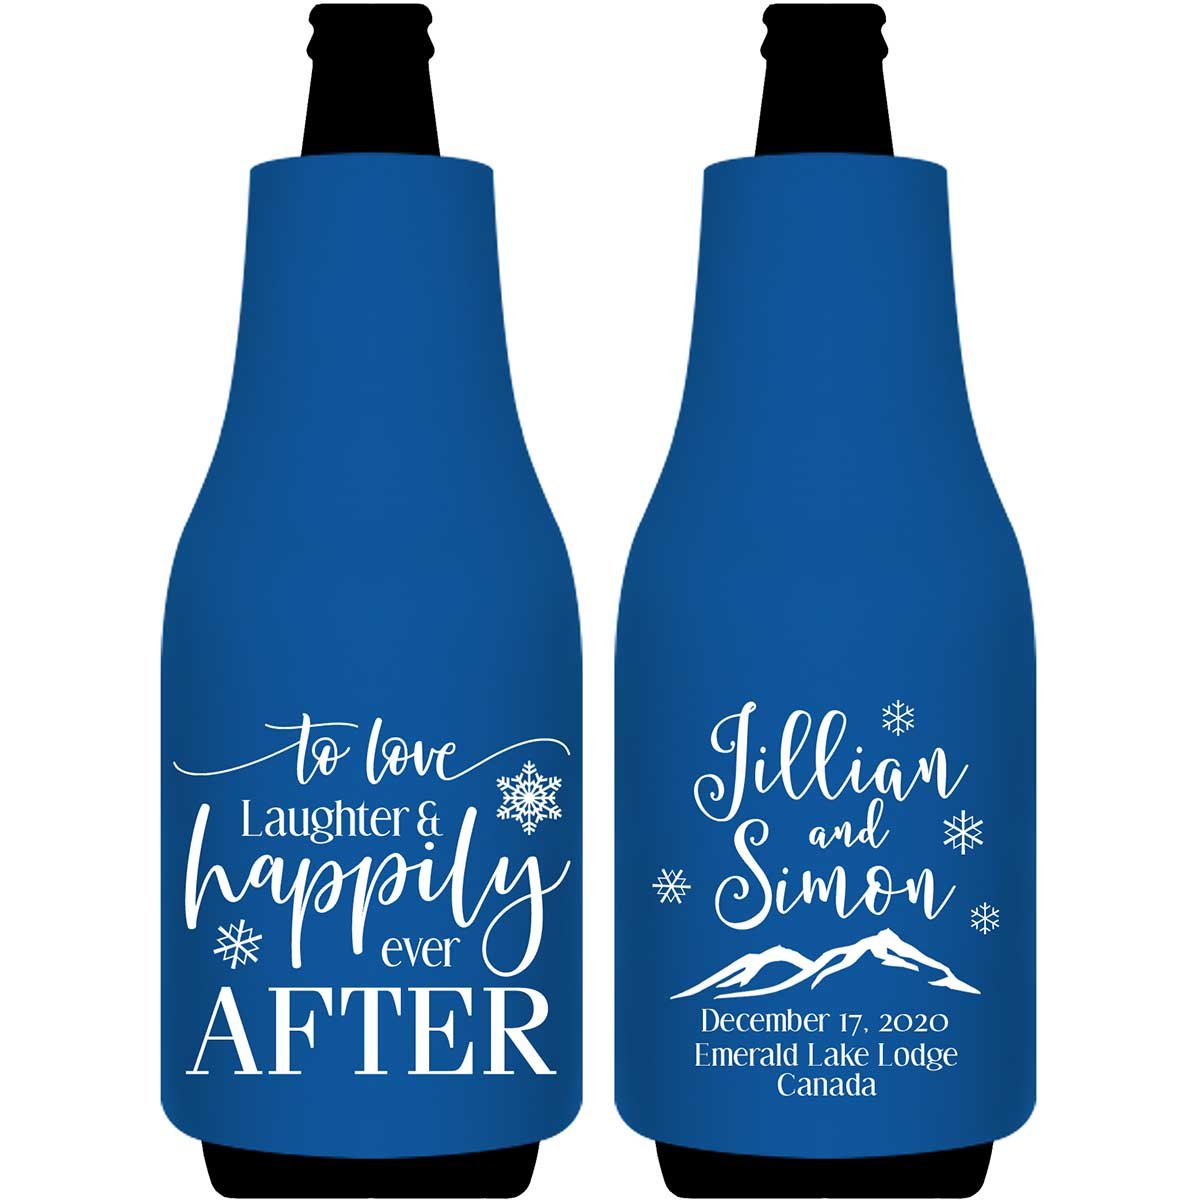 To Love Laughter & Happily Ever After 4B Foldable Bottle Sleeve Koozies Wedding Gifts for Guests